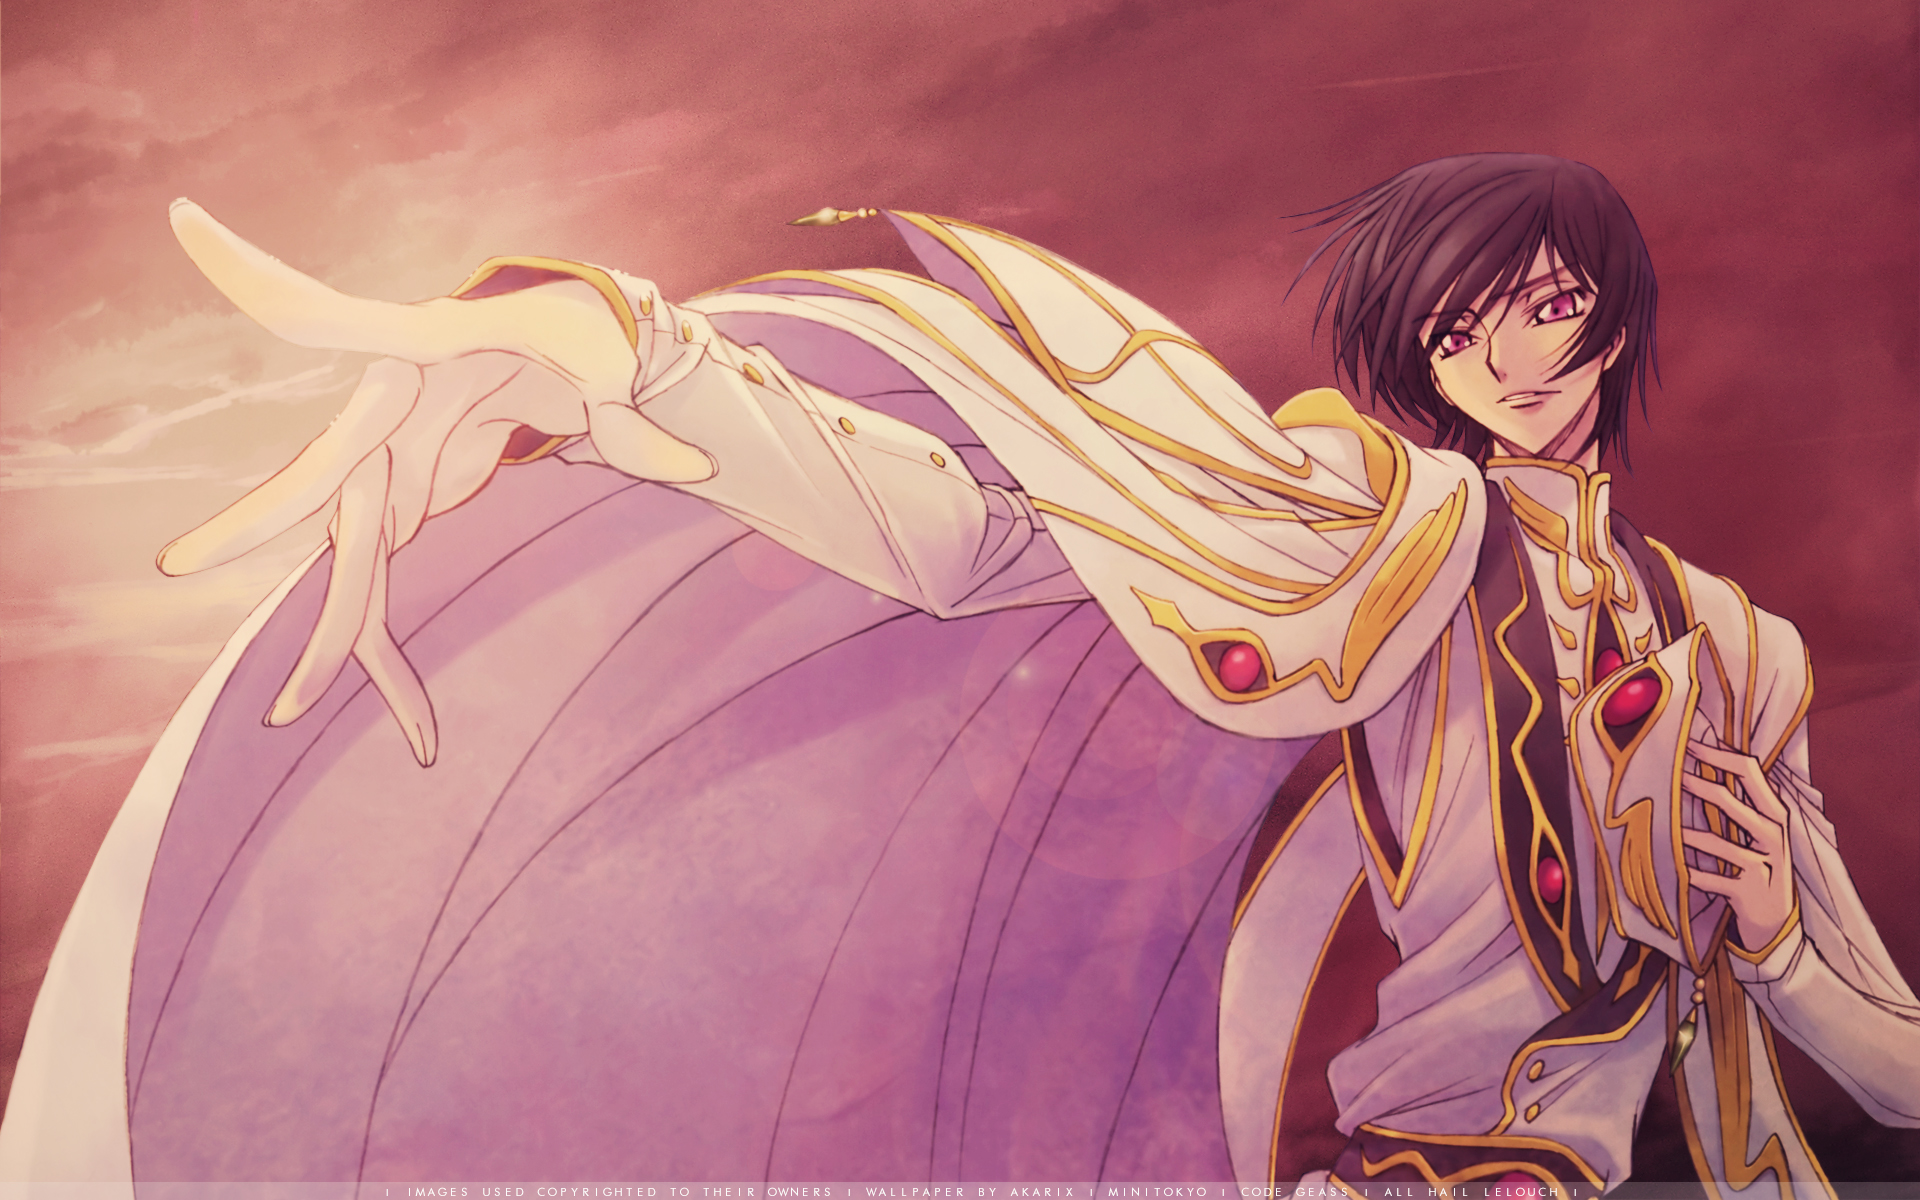 Lelouch Lamperouge from code geass in a captivating anime wallpaper.